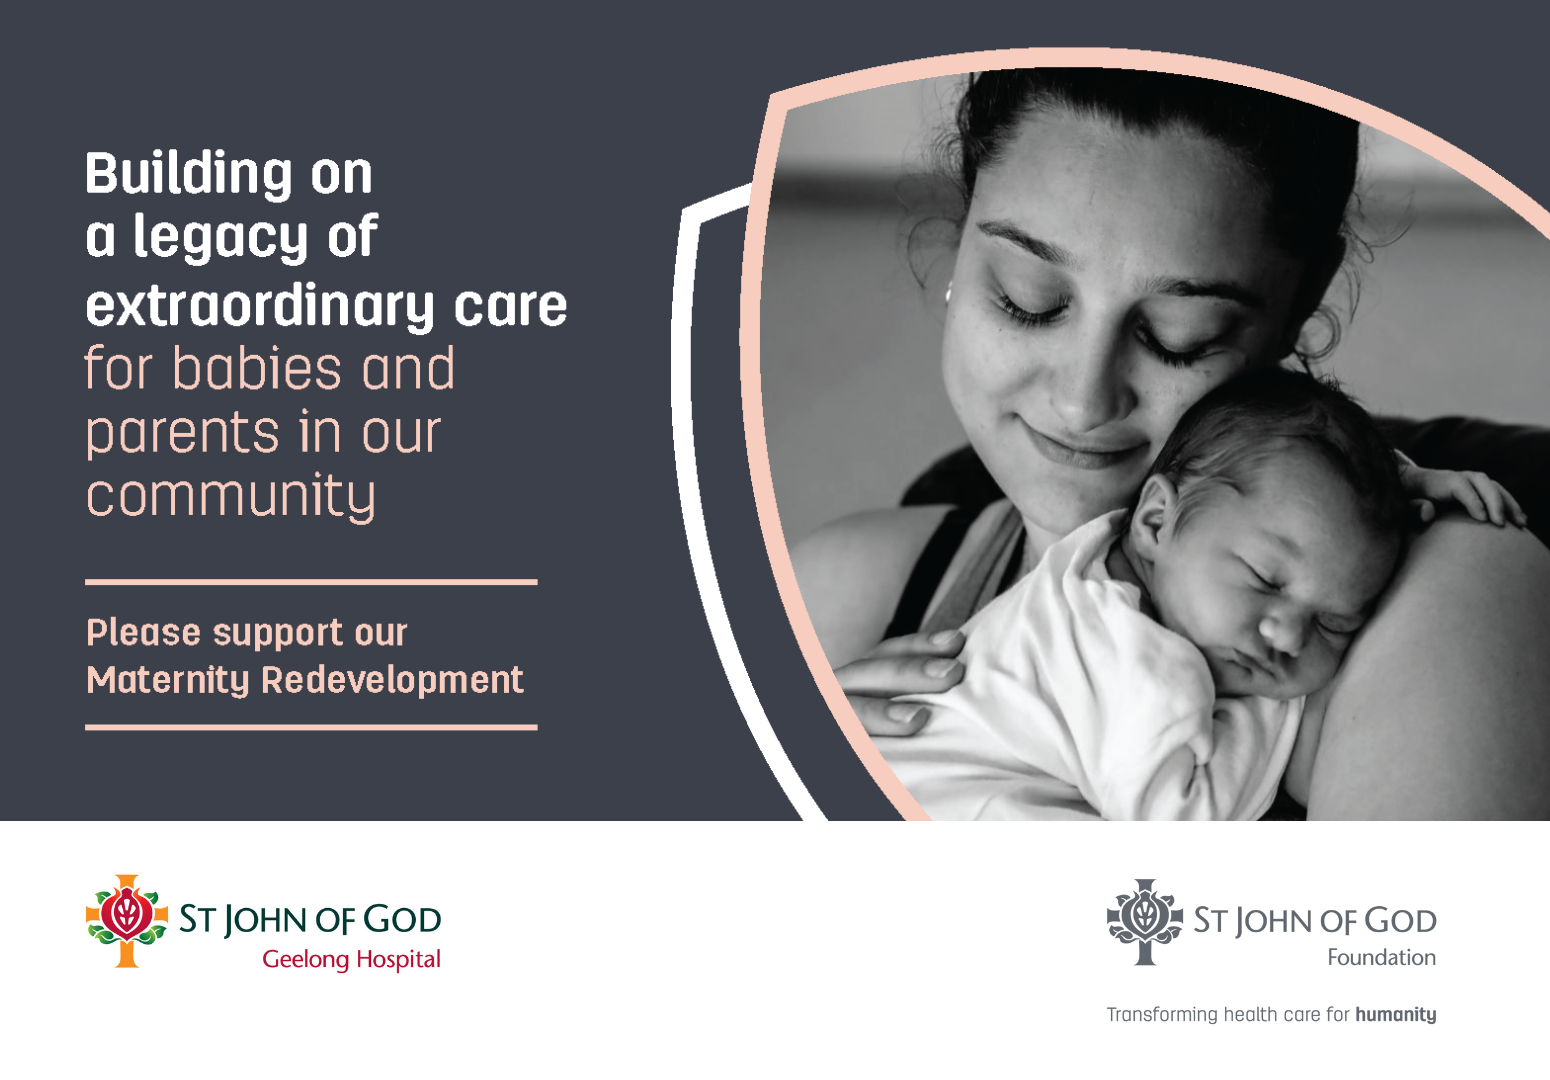 Text reads: Building on a legacy of extraordinary care for babies and parents in our community - Please support our maternity redevelopment